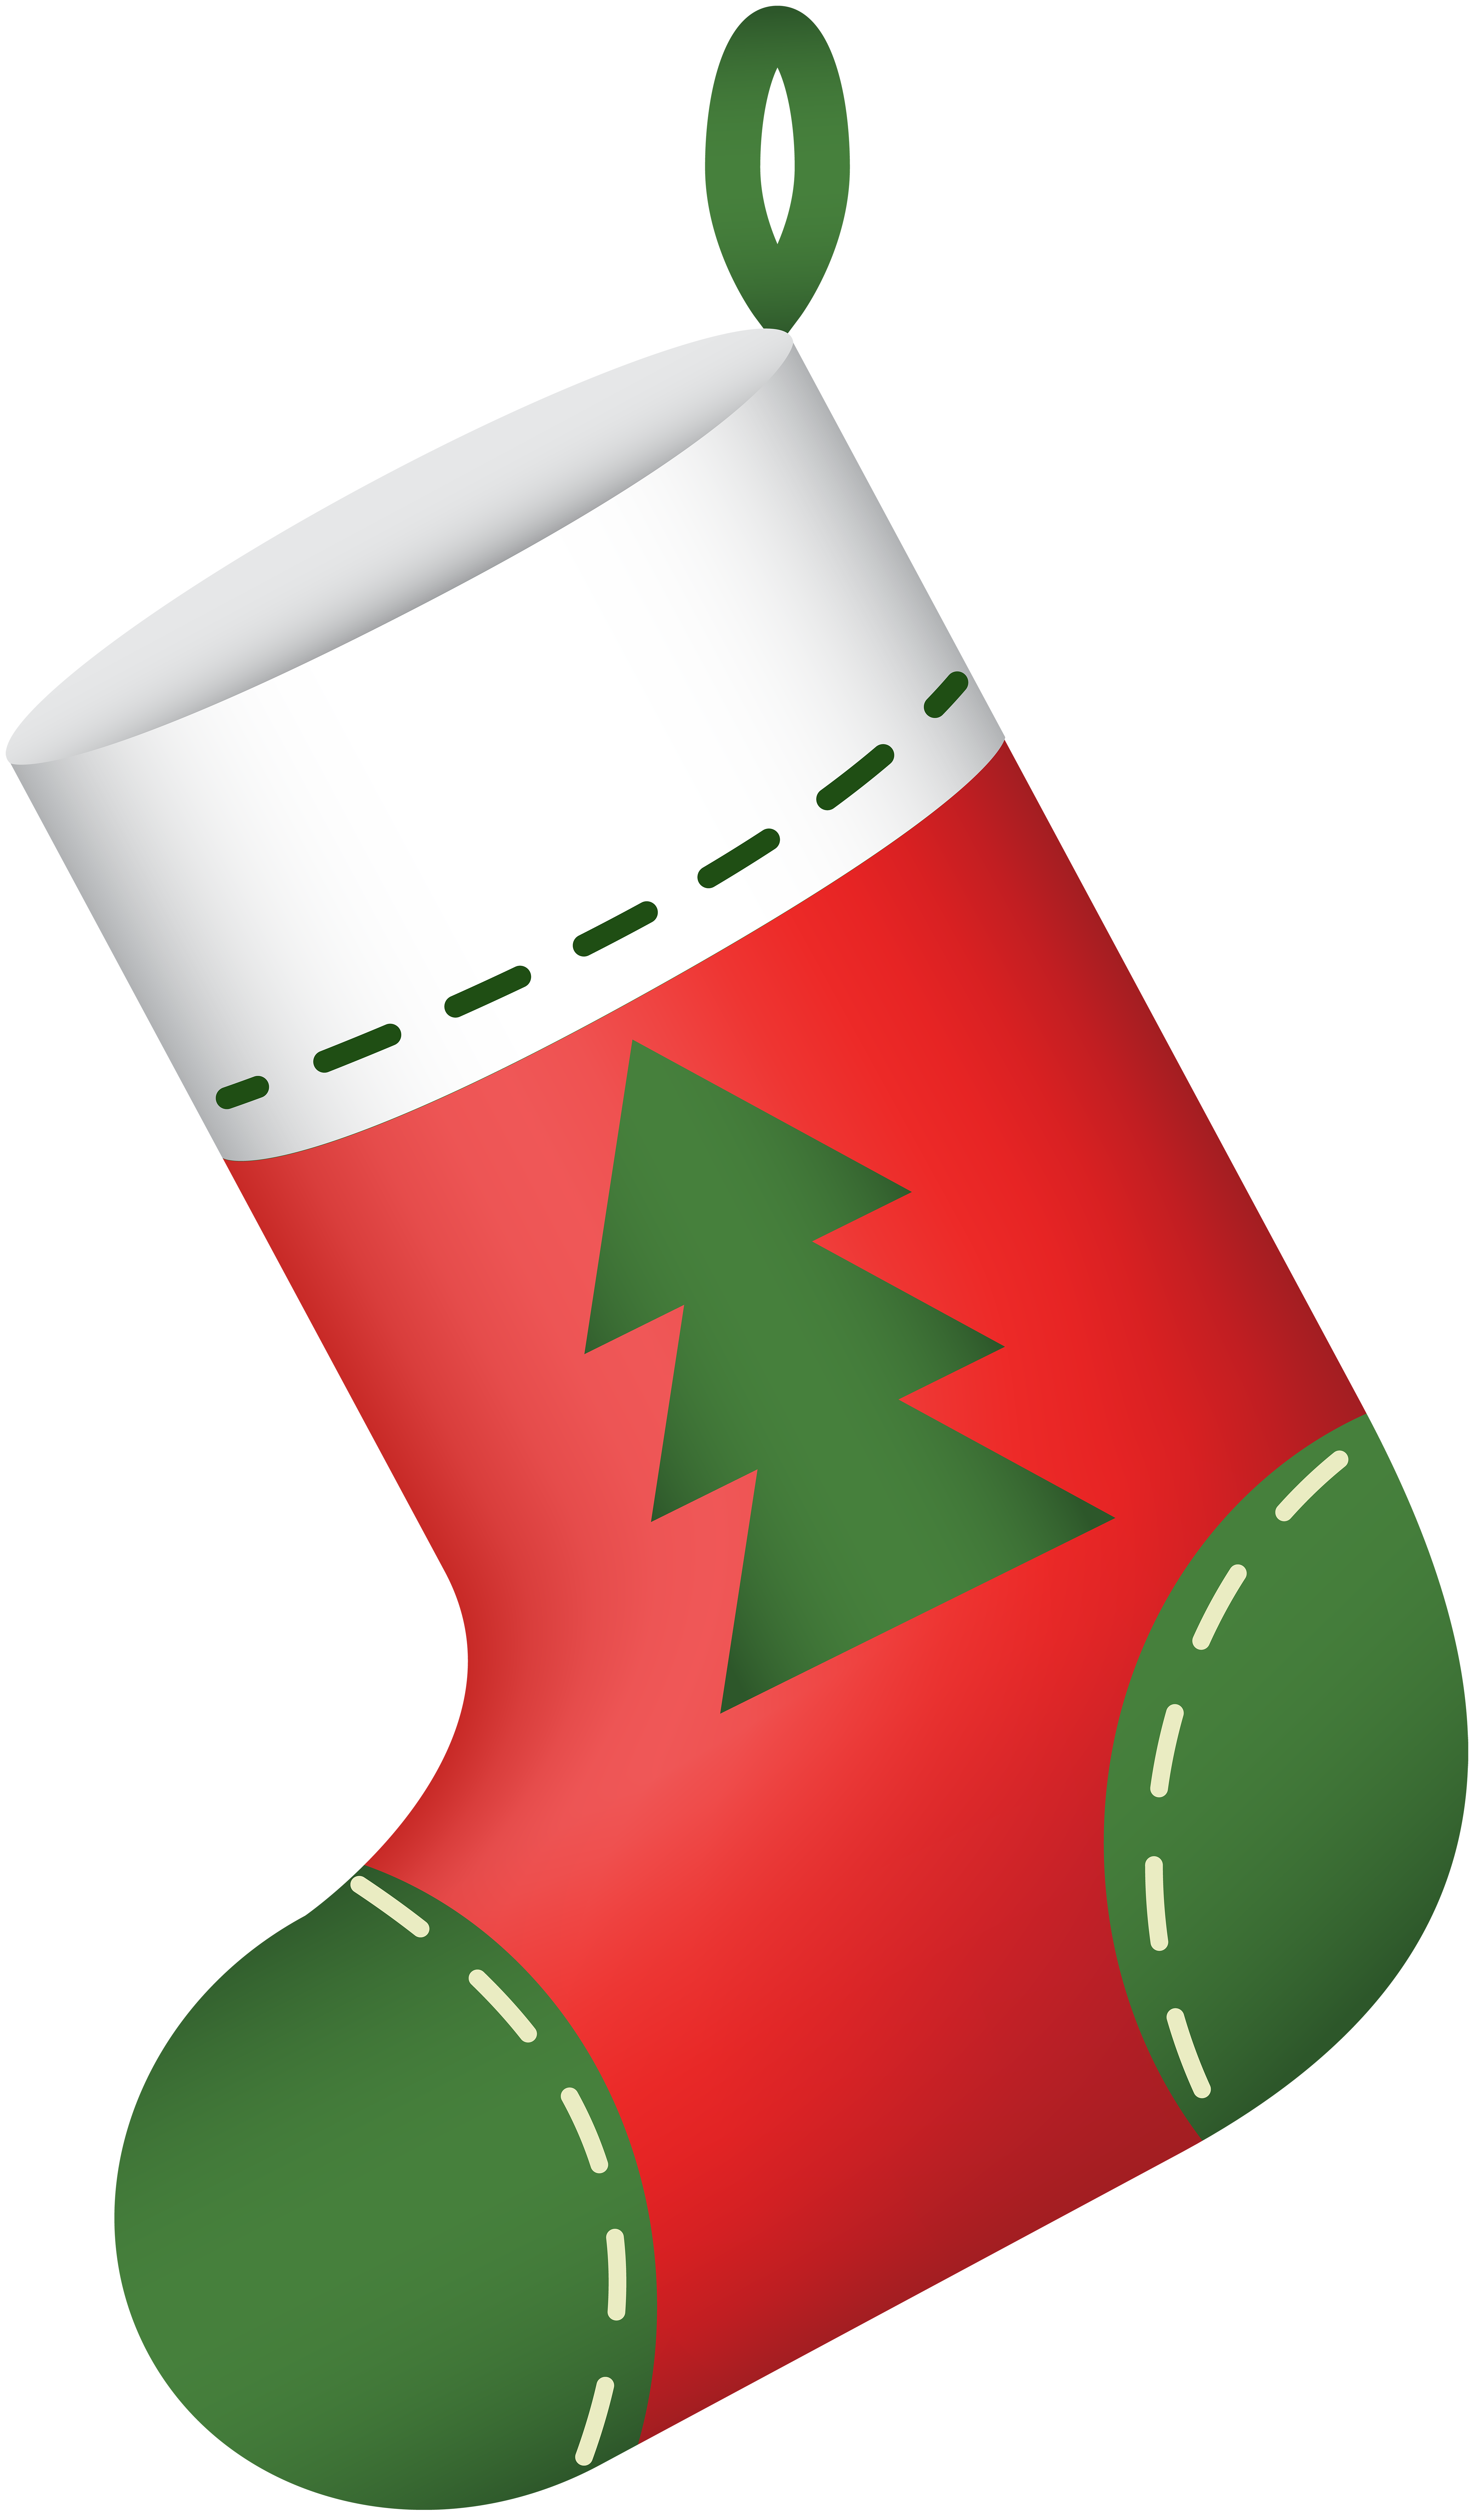 Free Christmas Stockings Clipart, Download Free Clip Art, Free Clip Art